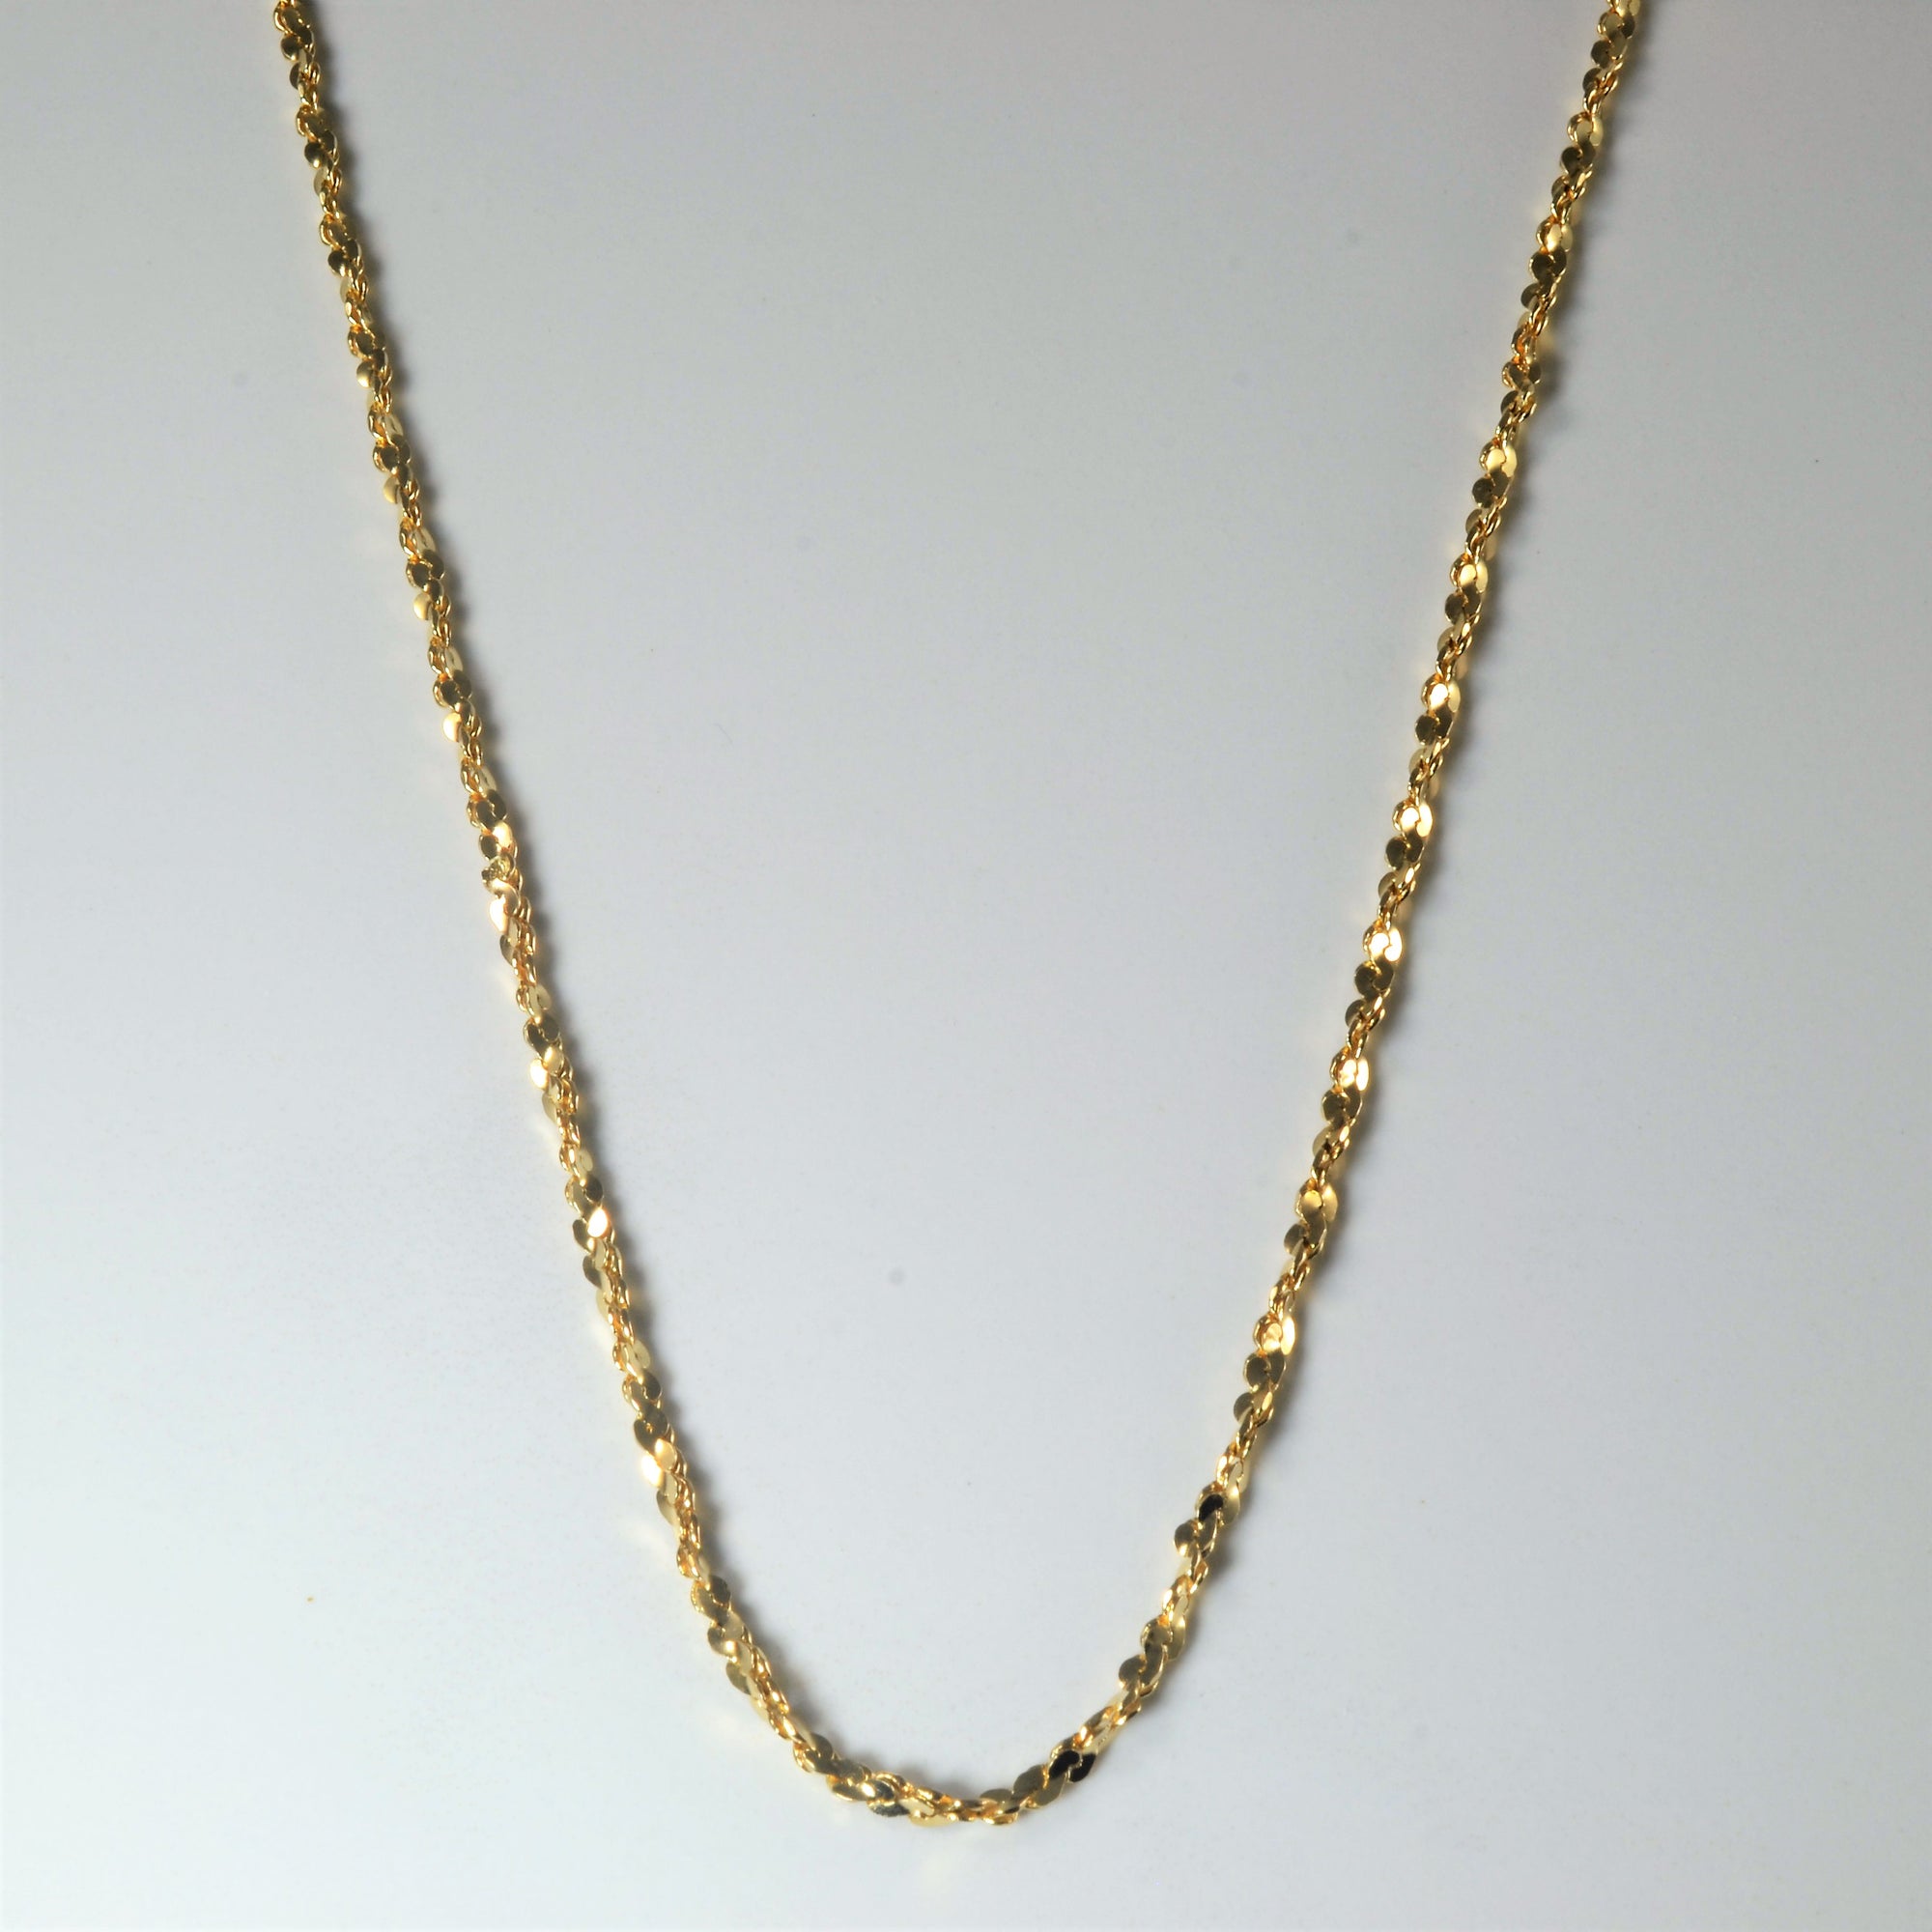 10k Yellow Gold Twisted Serpentine Chain | 32